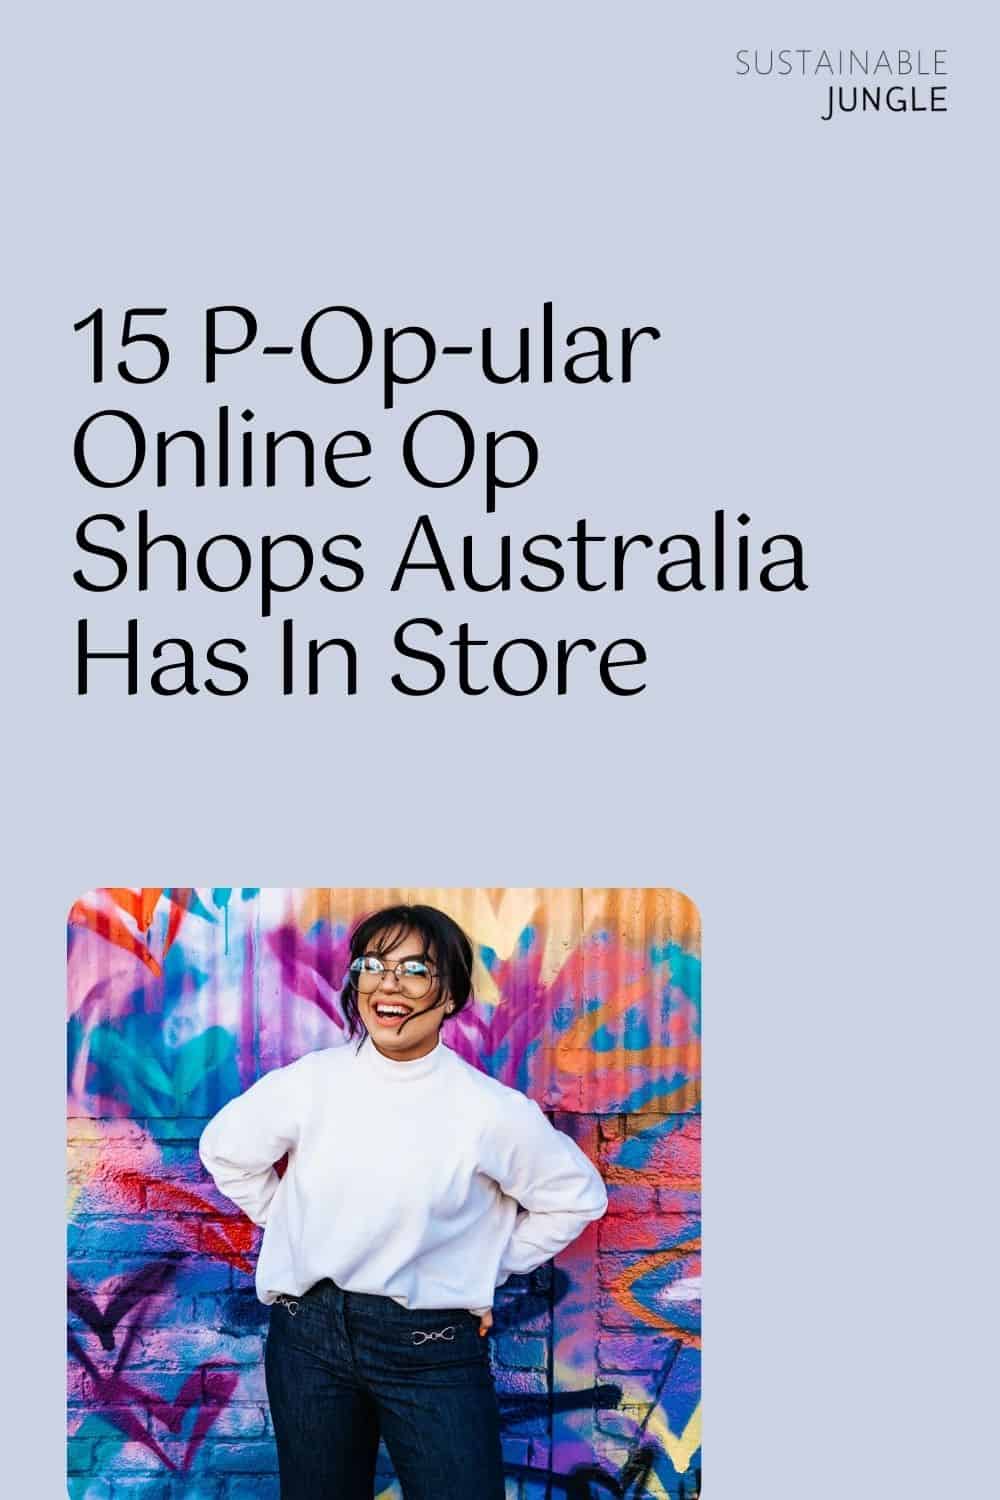 15 P-Op-ular Online Op Shops Australia Has In Store Image by The Salvos Store #onlineopshopaustralia #opshoponlineaustralia #opshopsaustralia #bestaustralianopshops #sustainablejungle